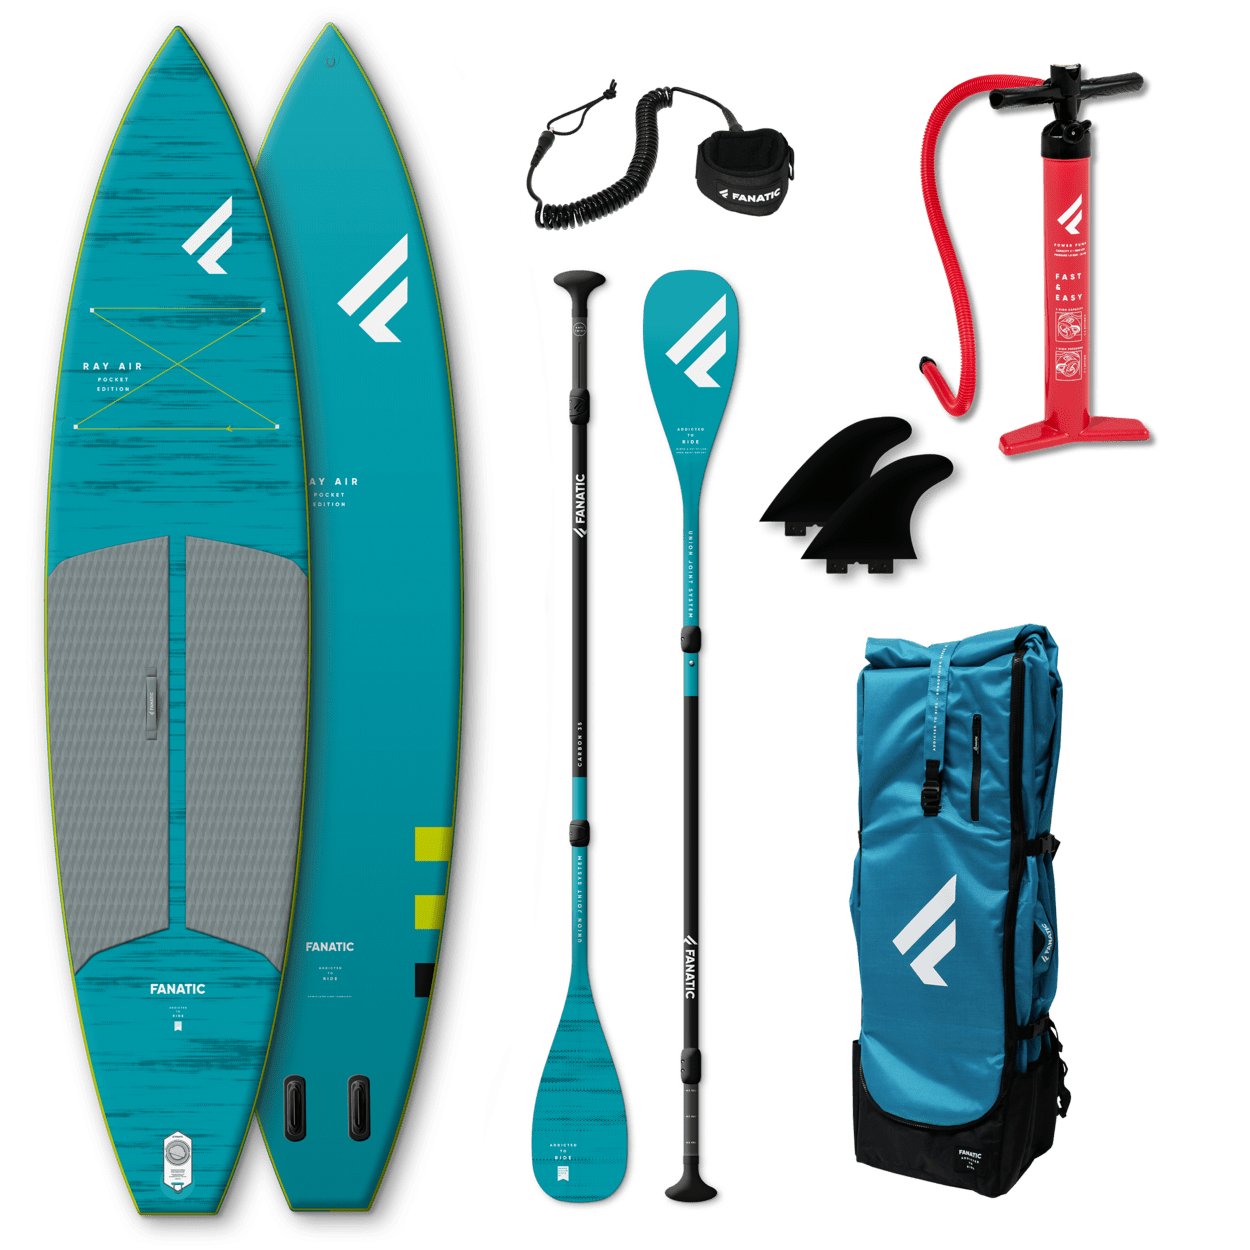 Fanatic Package Ray Air Pocket/C35 2022 iSUP Paddleboard - Worthing Watersports - 9010583014661 - iSUP Packages - Fanatic SUP